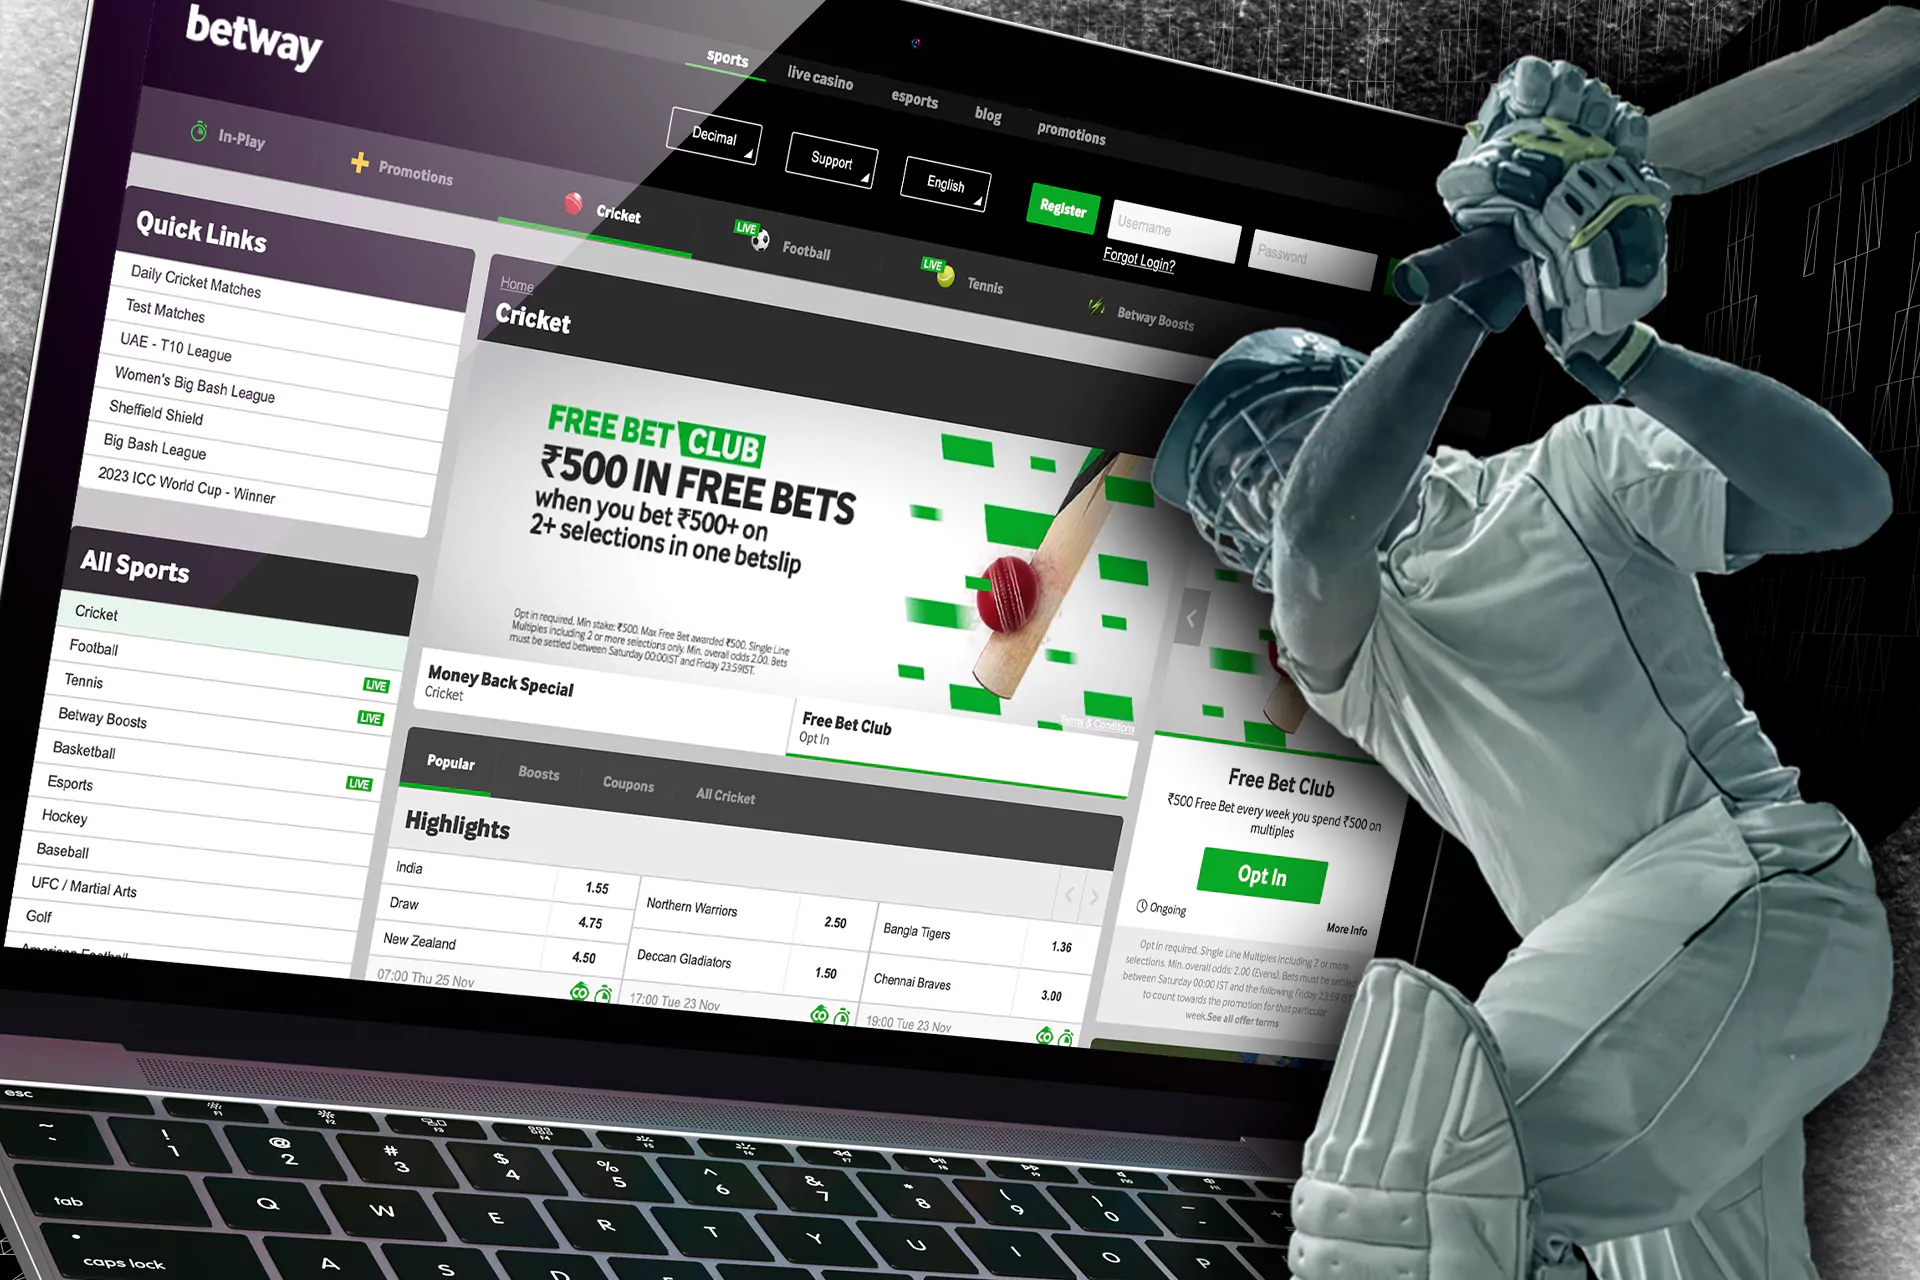 Place you bets on cricket safely at Betway.